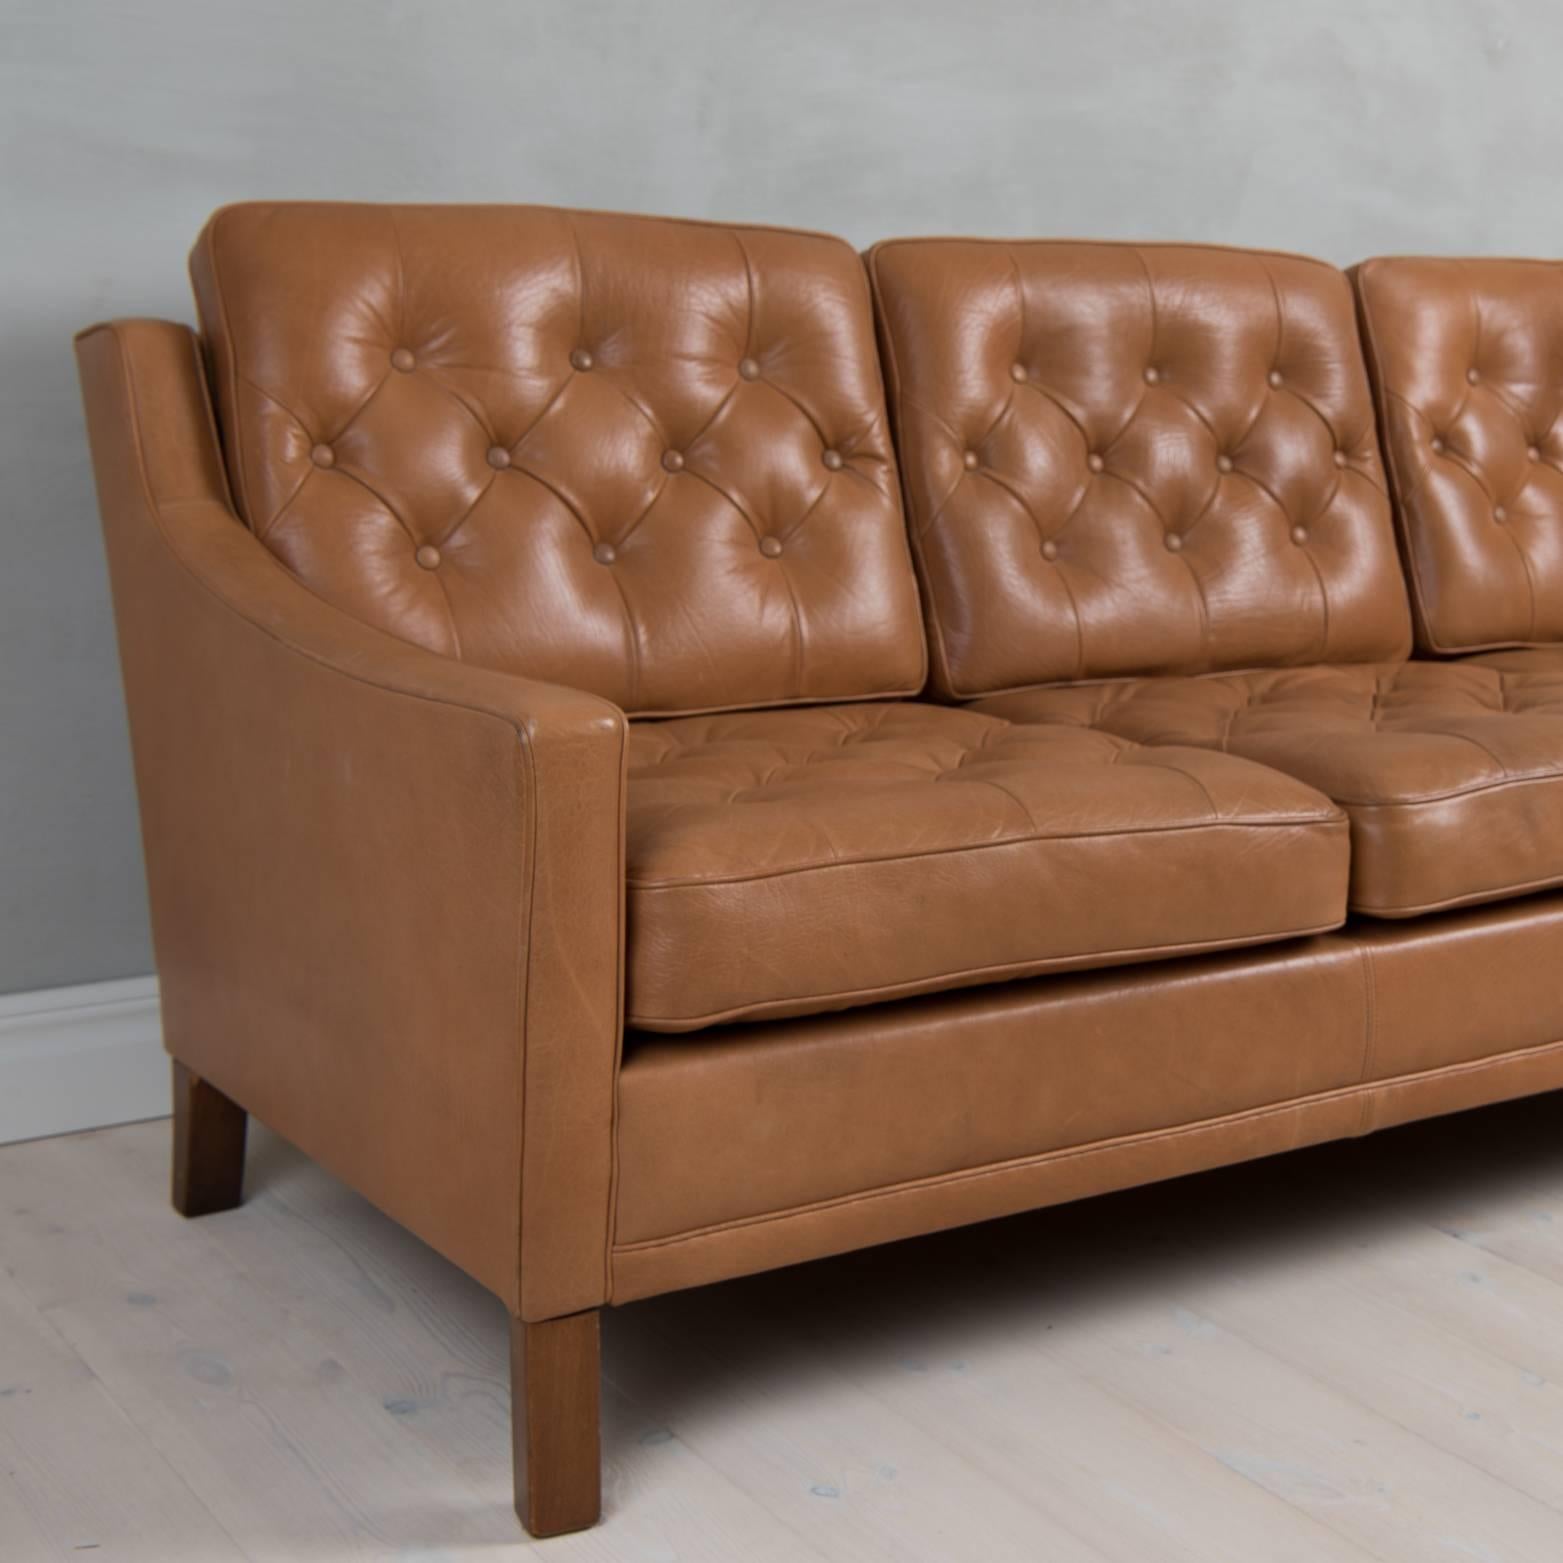 Sofa in leather manufactured by OPE furniture Sweden. Designed by Ib Kofod-Larsen. 
Three-seat sofa with lose leather-dressed cushions with buttons.